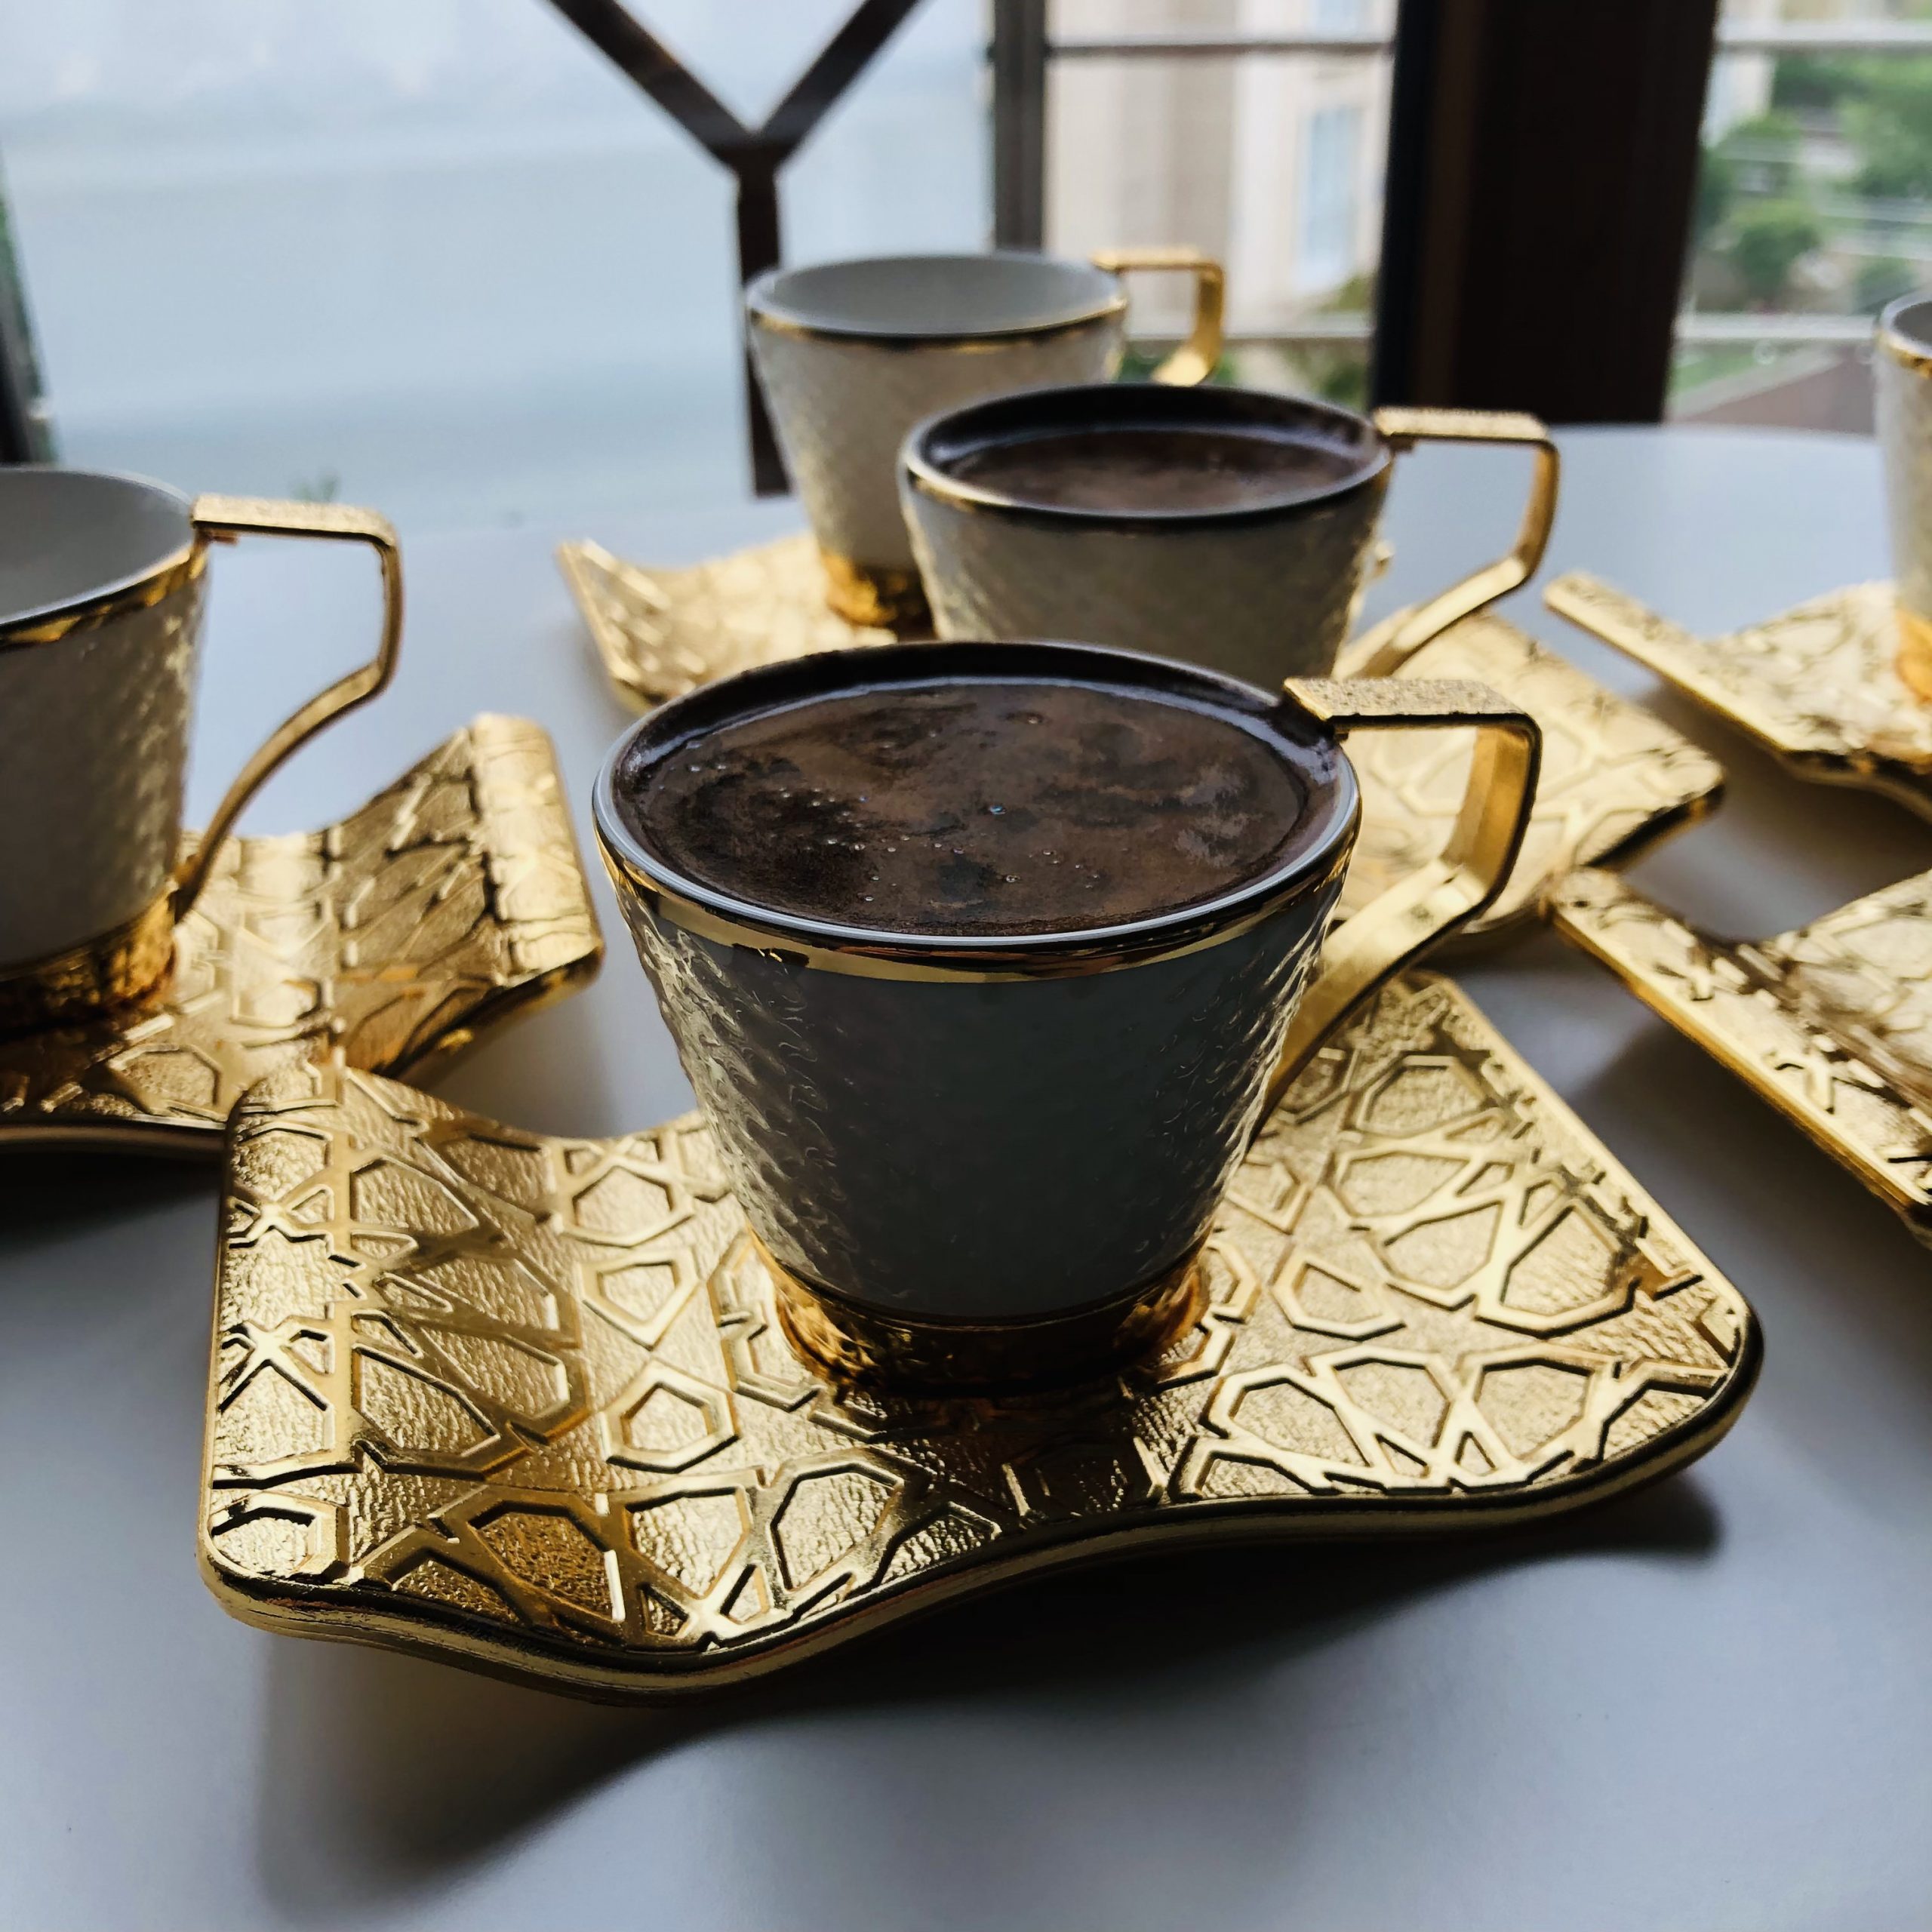 https://traditionalturk.com/wp-content/uploads/2021/05/luxury-gold-color-turkish-coffee-cup-set-for-six-person-4-scaled.jpeg